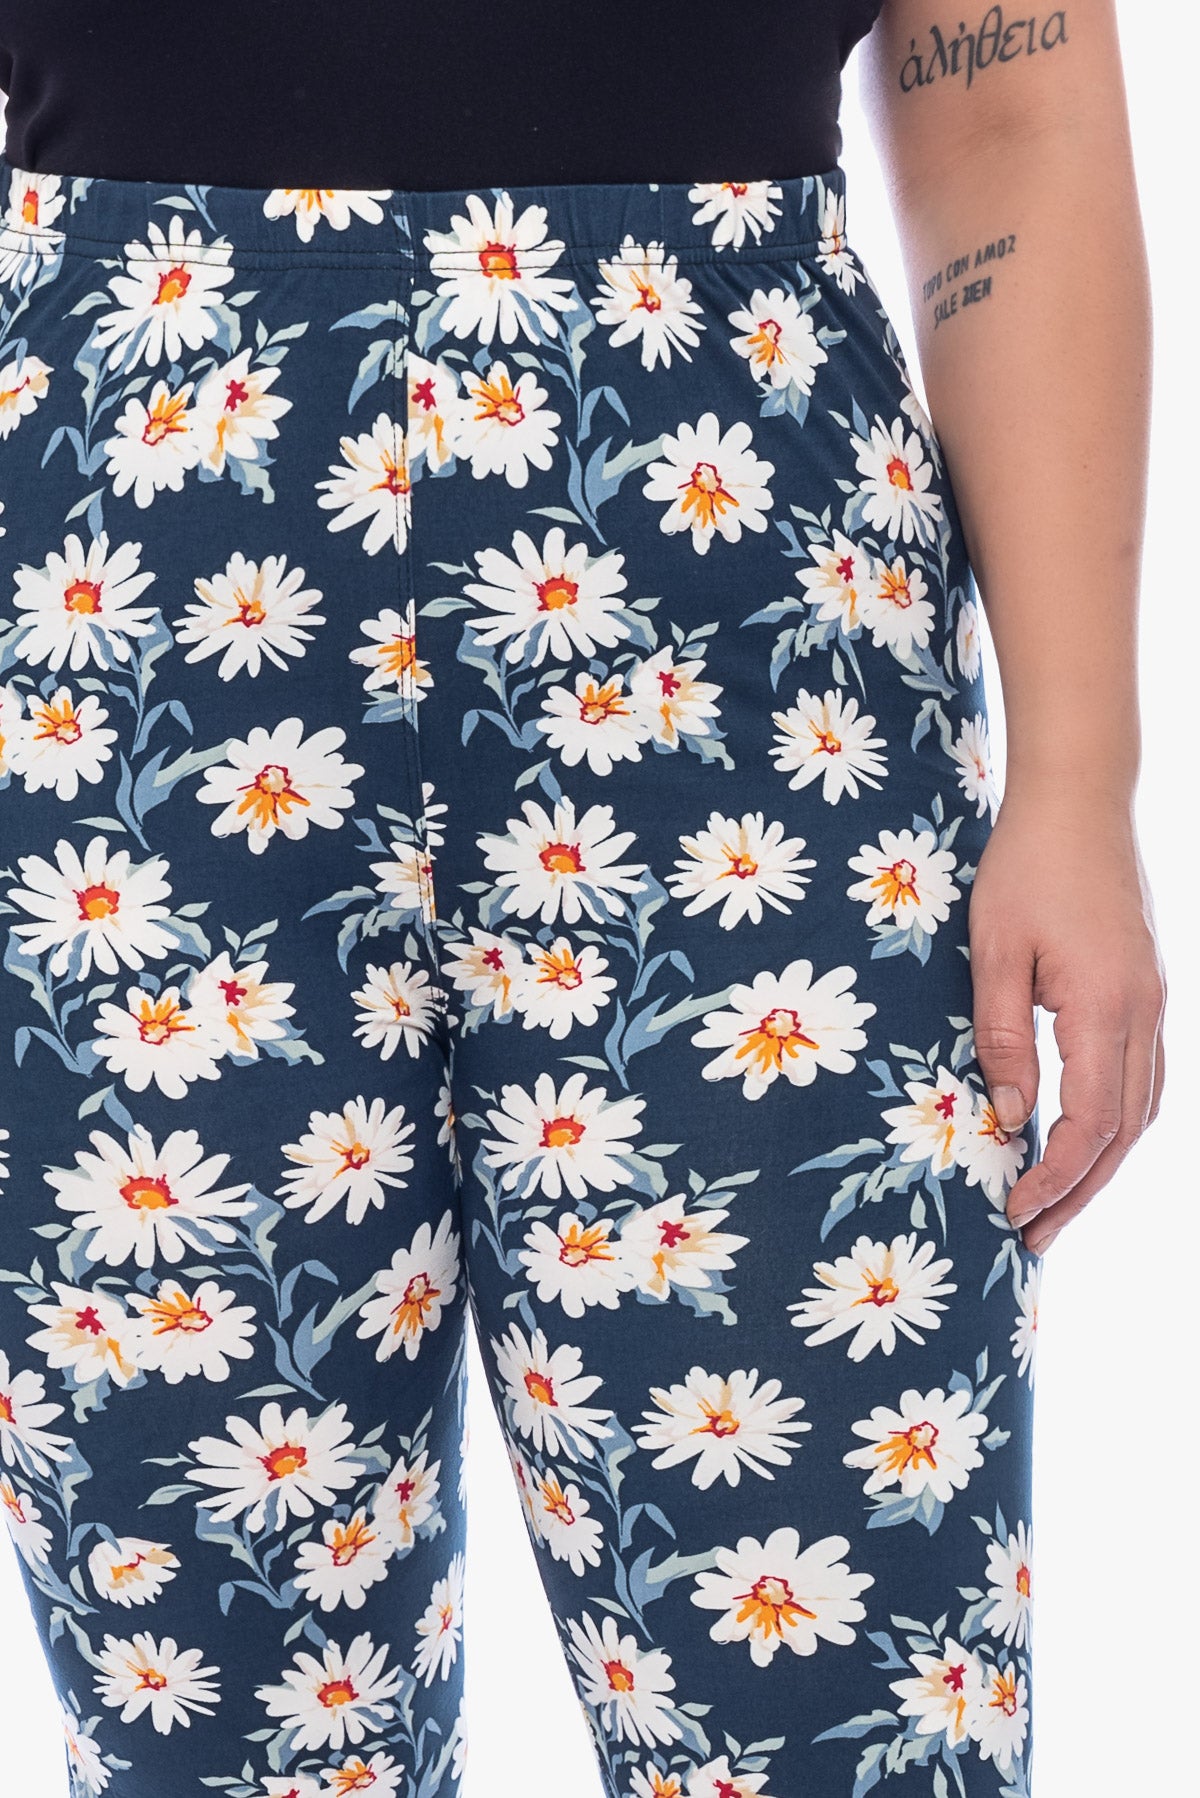 Lilly - marguerites